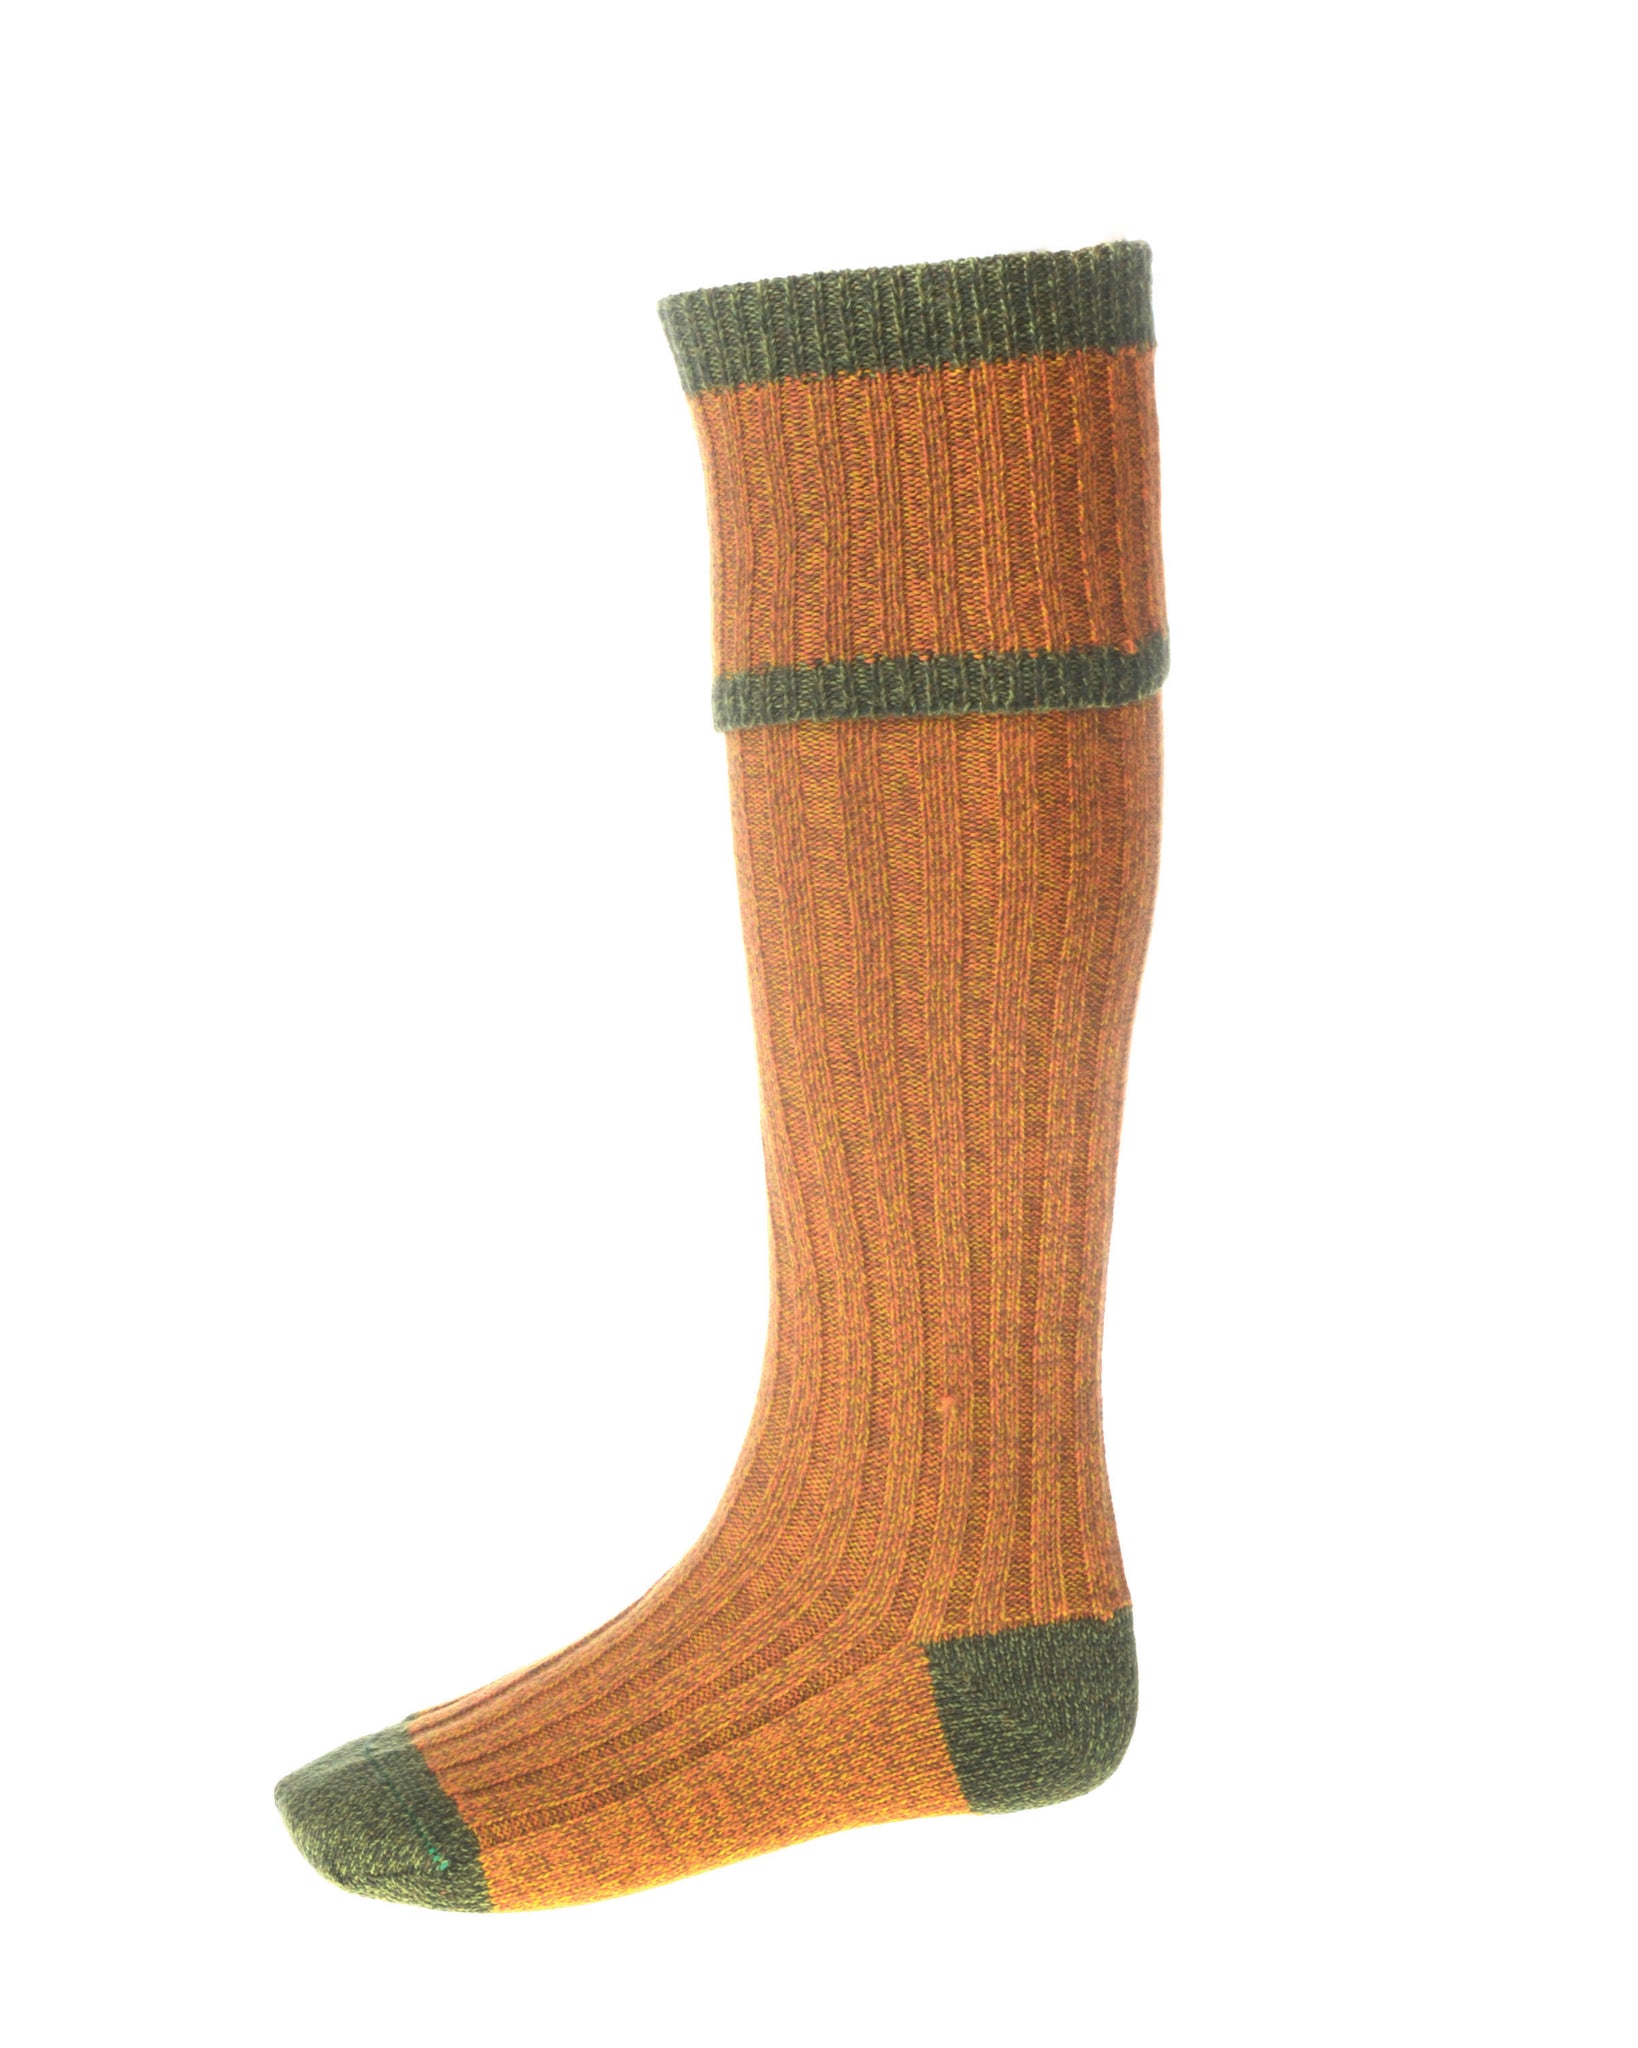 Knee High Golf Socks made from Merino Wool with removable Garter Ties ...